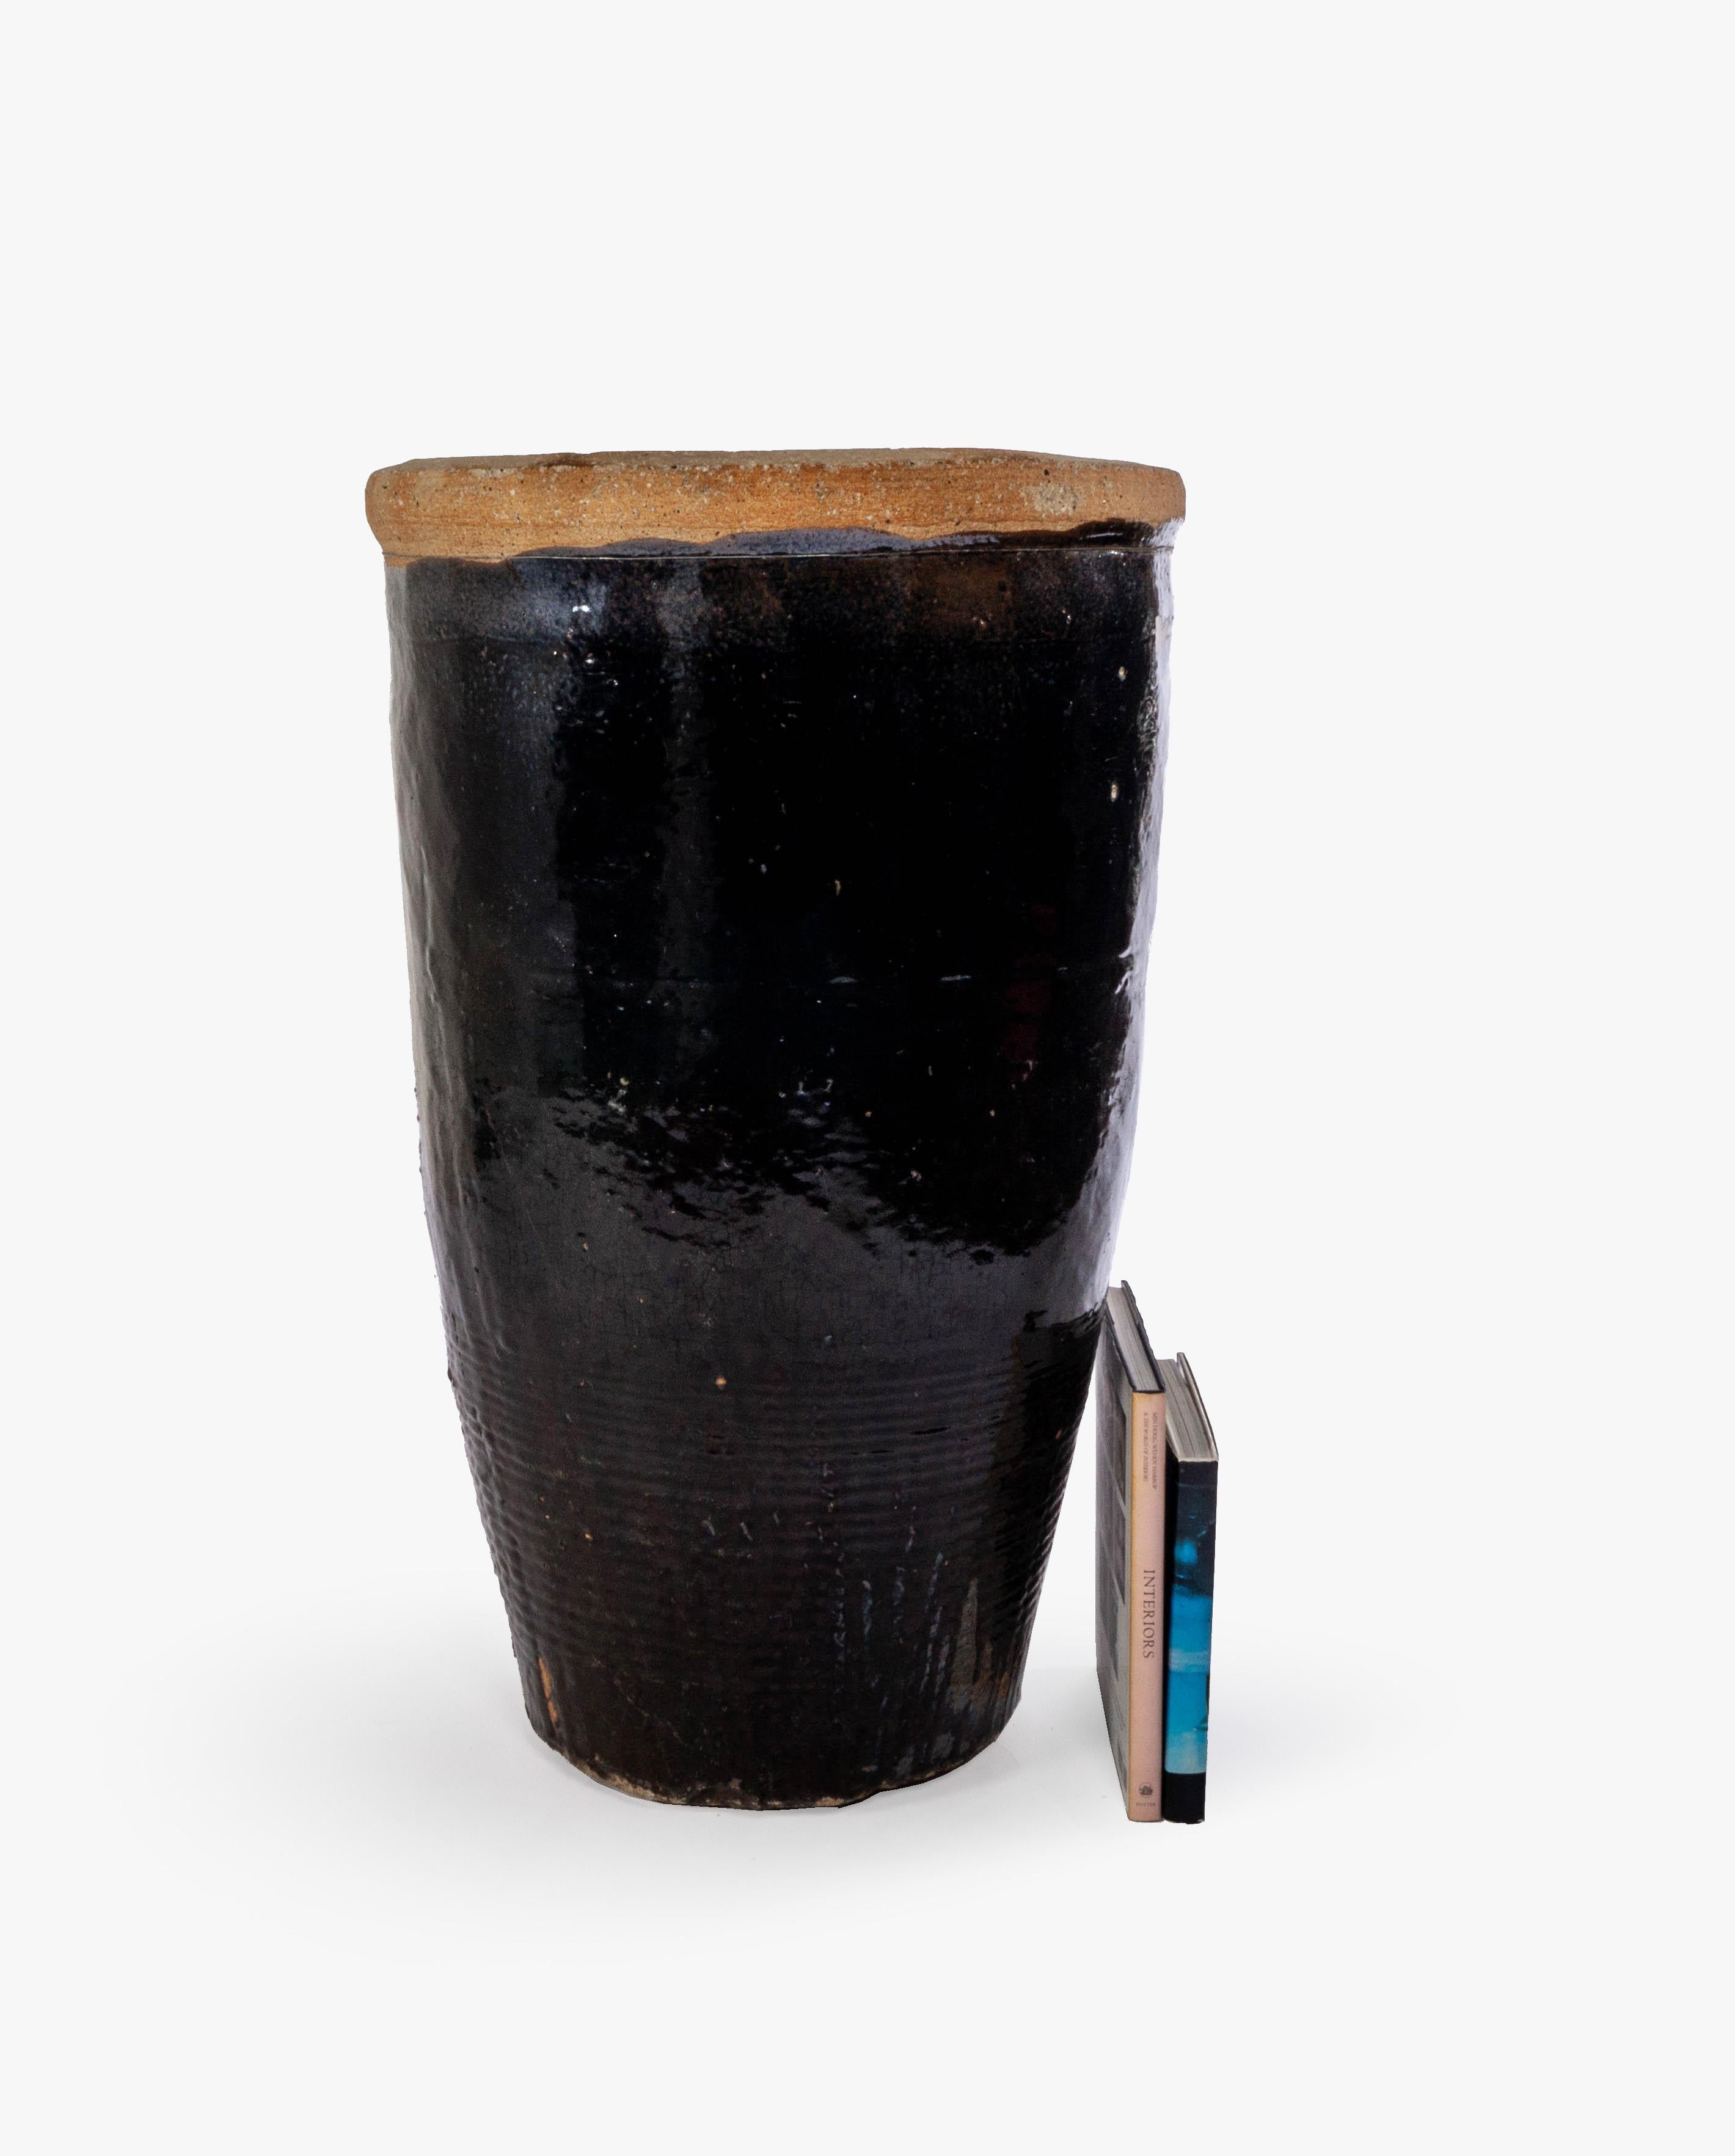 This storage jar features a beautiful sand-colored, textured lip and a glossy dark chocolate, black colored glaze throughout its length.

This piece is a part of one-of-a-kind collection, Le Monde. French for “The World”, the Le Monde collection